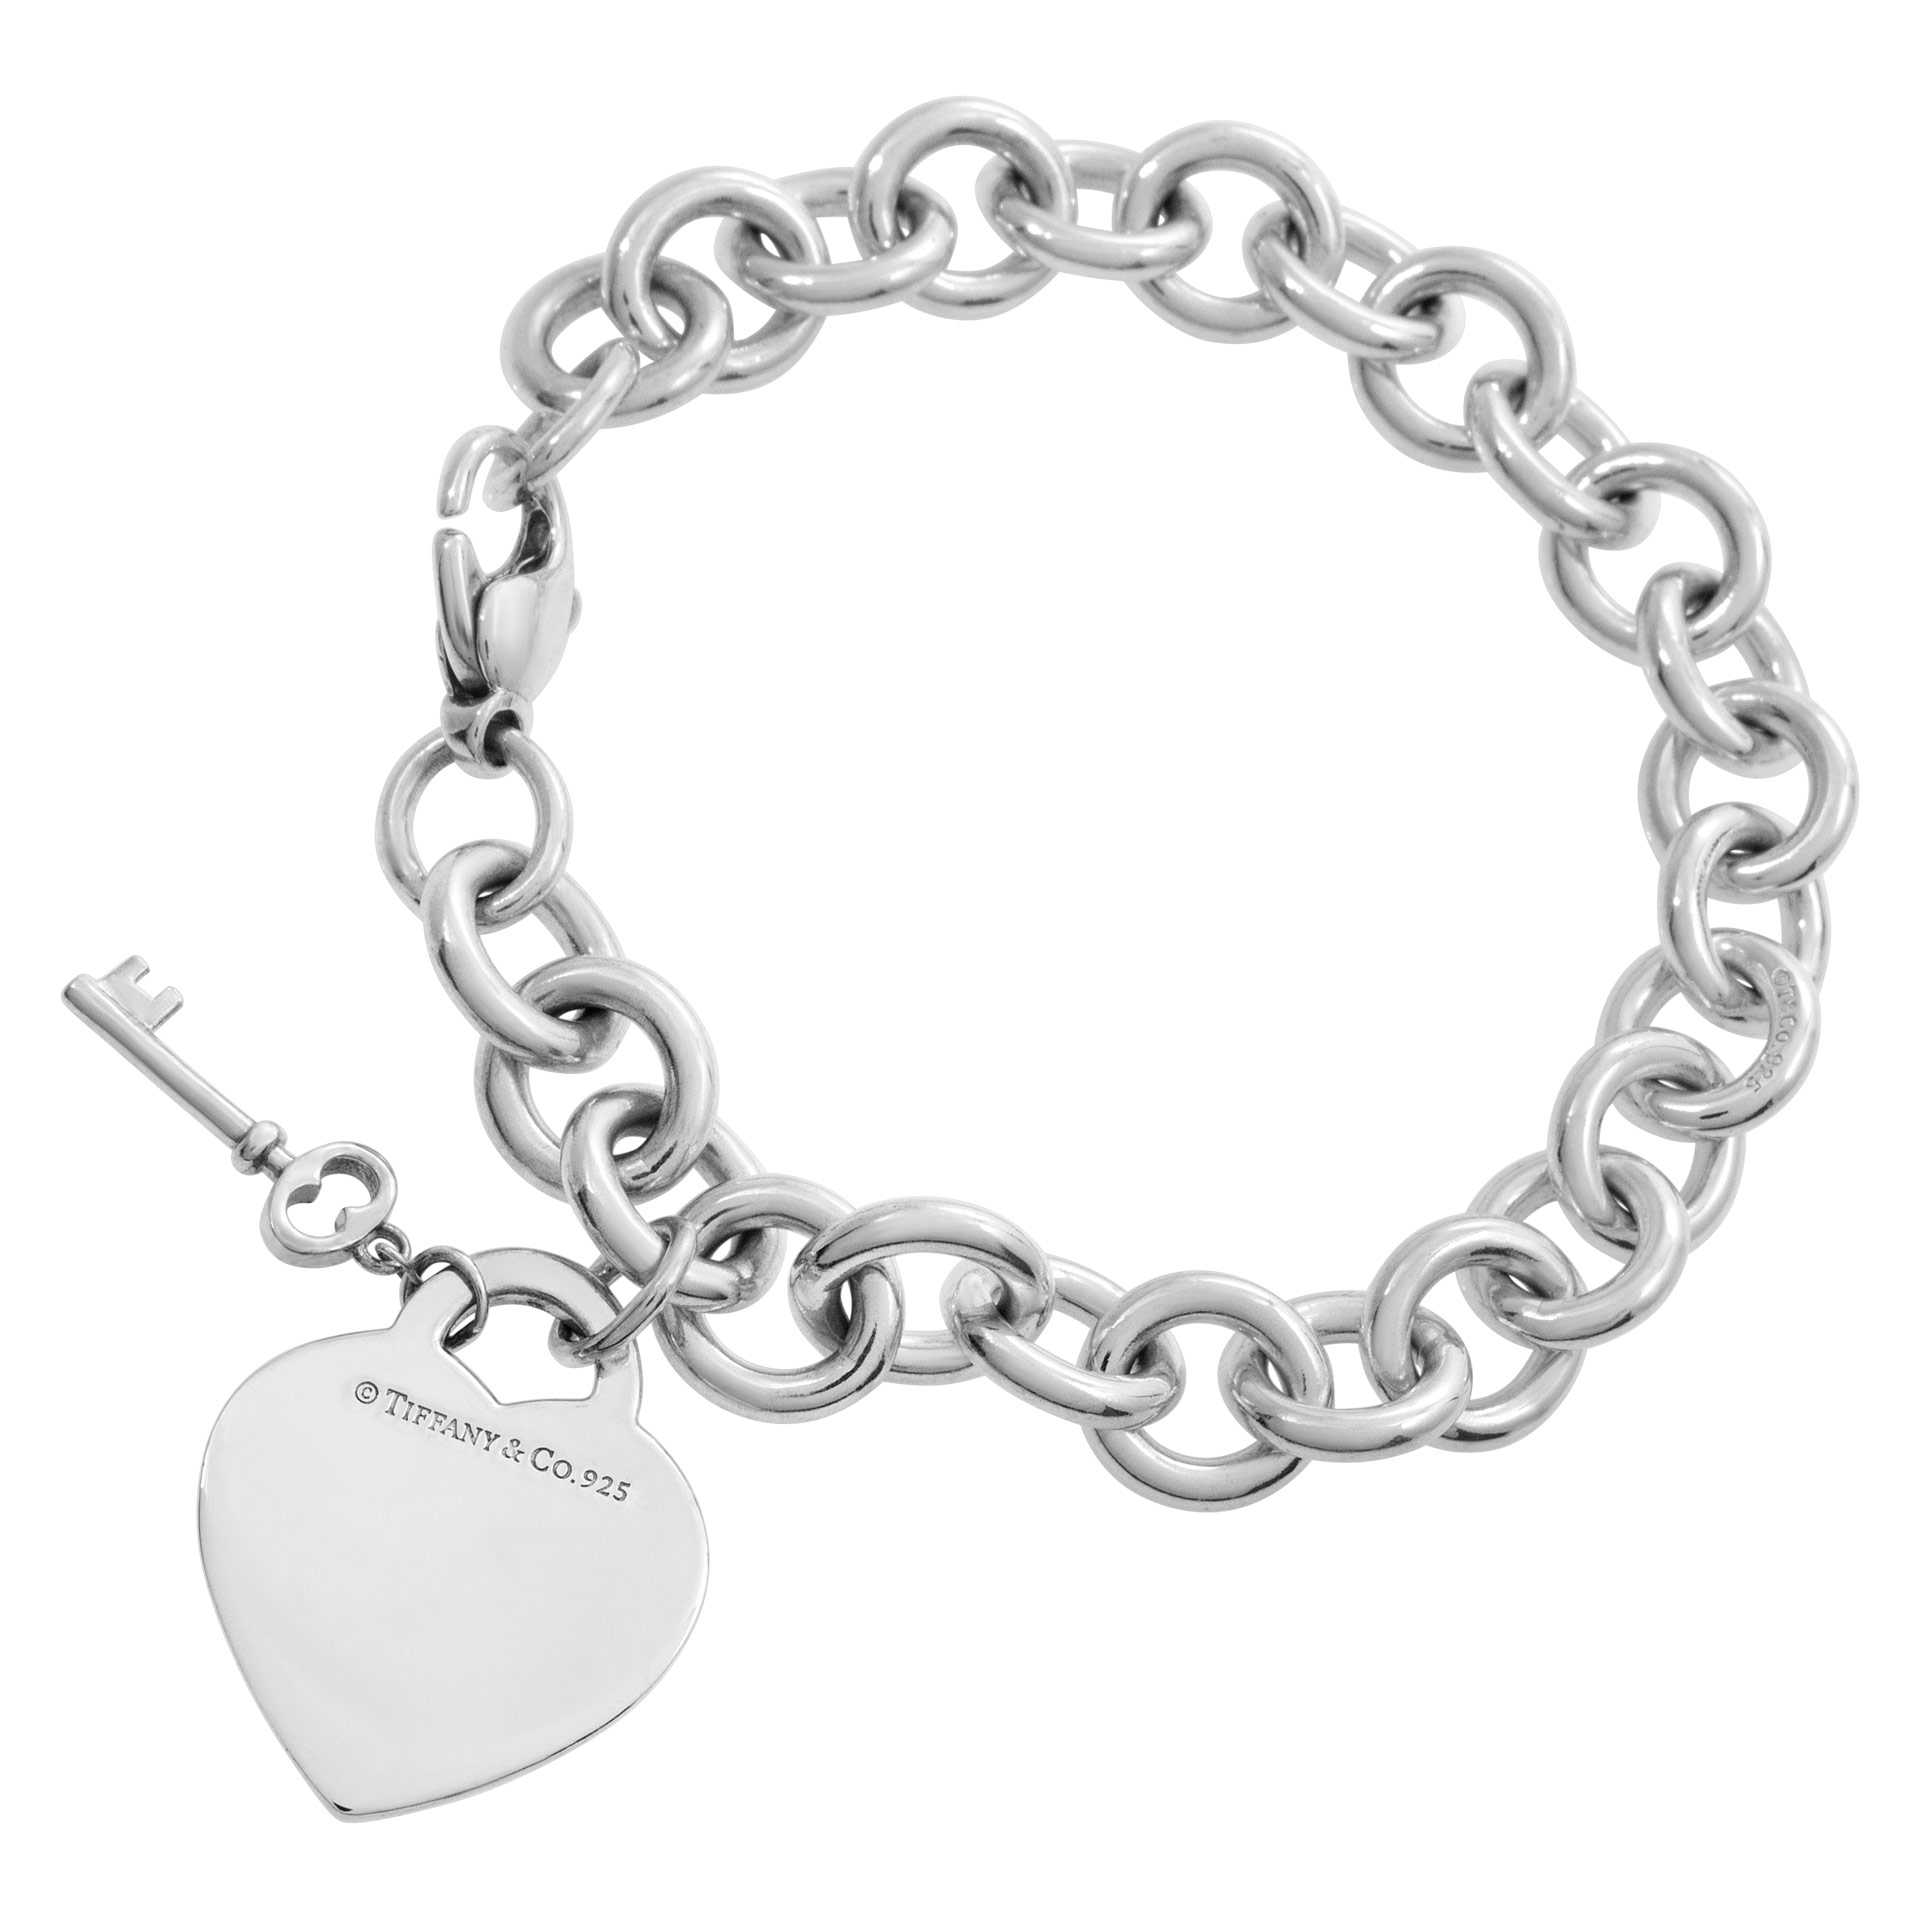 Tiffany and Co."PLEASE RETURN TO TIFFANY" Heart & Key charms bracelet in sterling silver